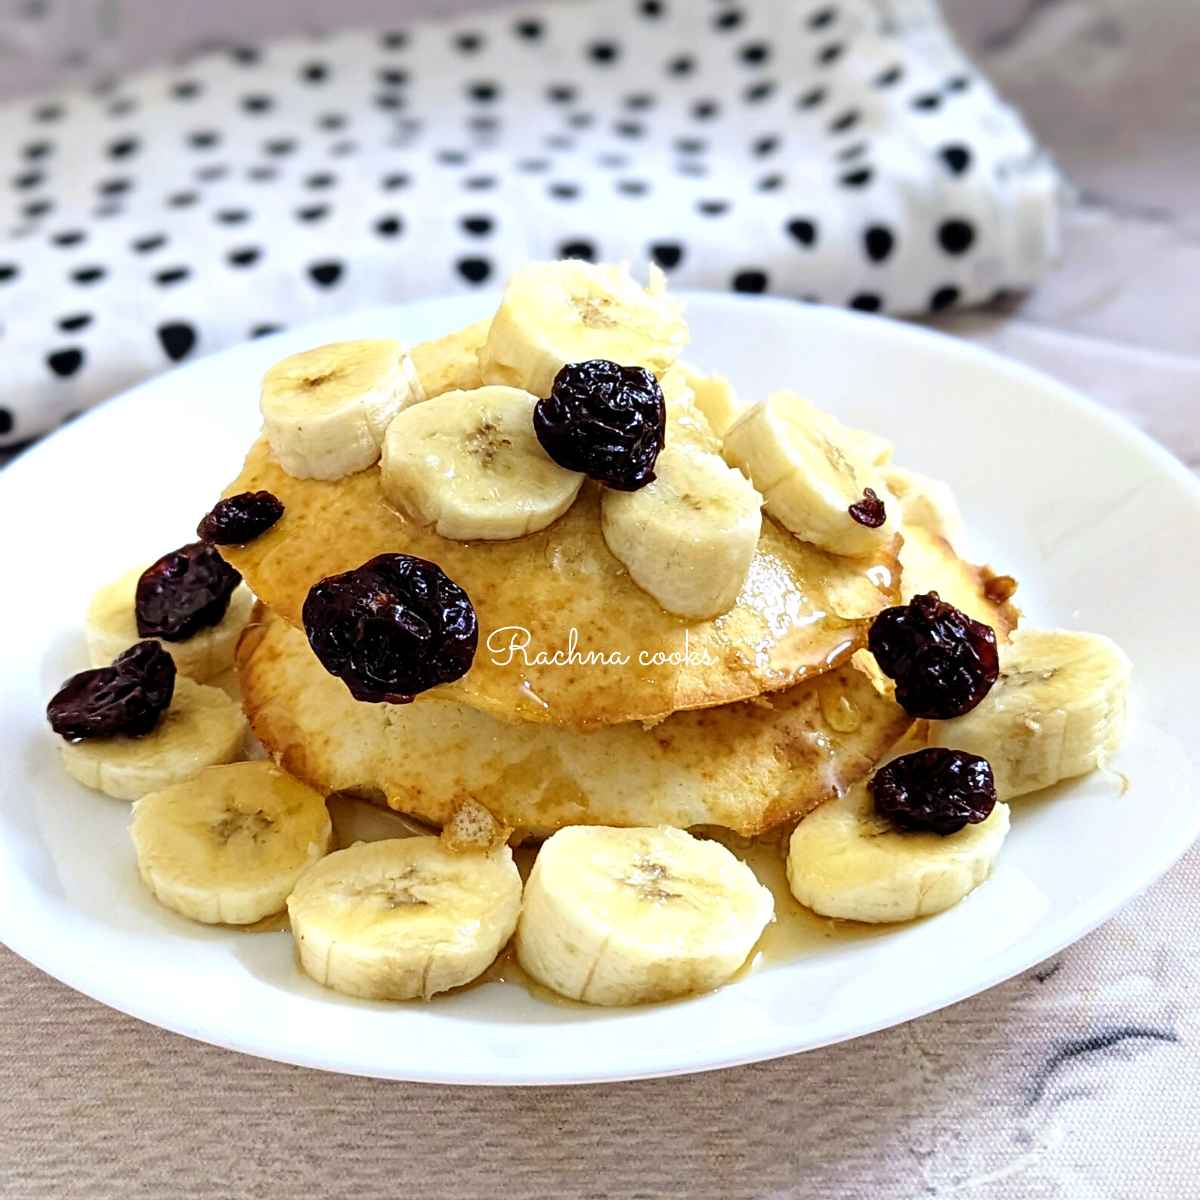 Two air fryer pancakes with a drizzle of maple syrup, cut bananas and cherries.